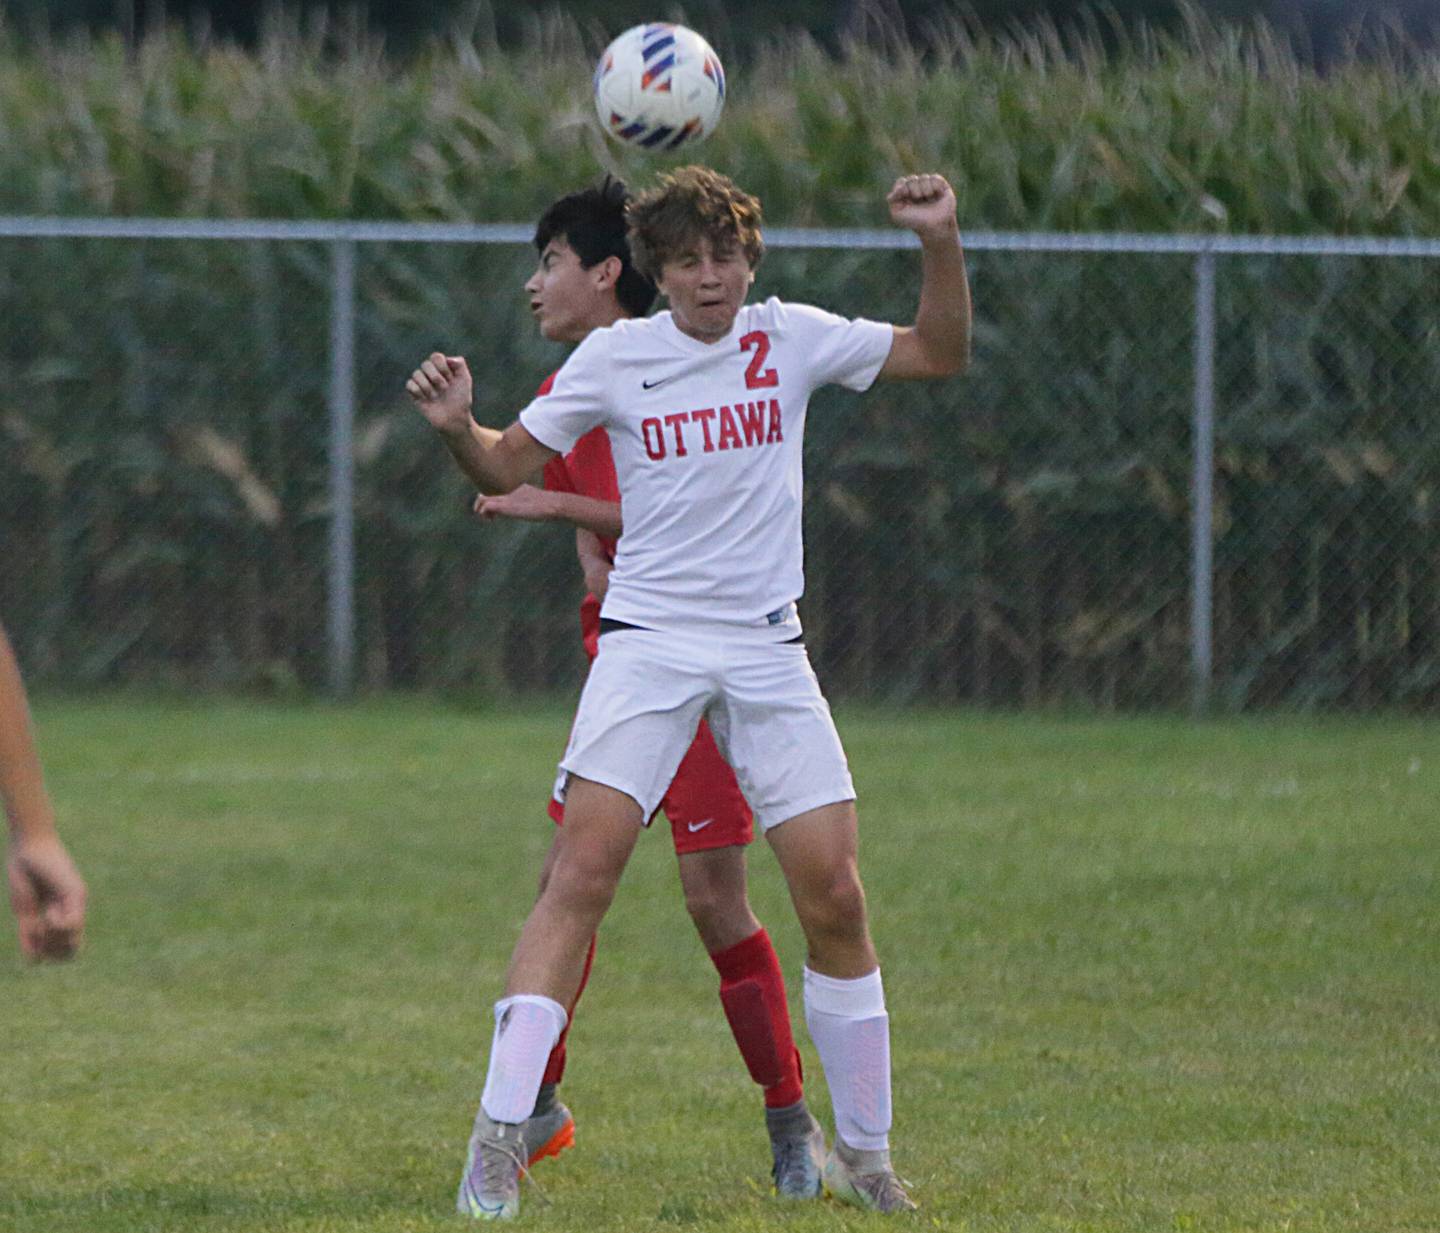 Ottawa's Connor Diederich (2) puts a header on the ball as La Salle-Peru's Adrian Gonzalez defends on Monday, Sept. 12, 2022 at the L-P Sports Complex in La Salle.